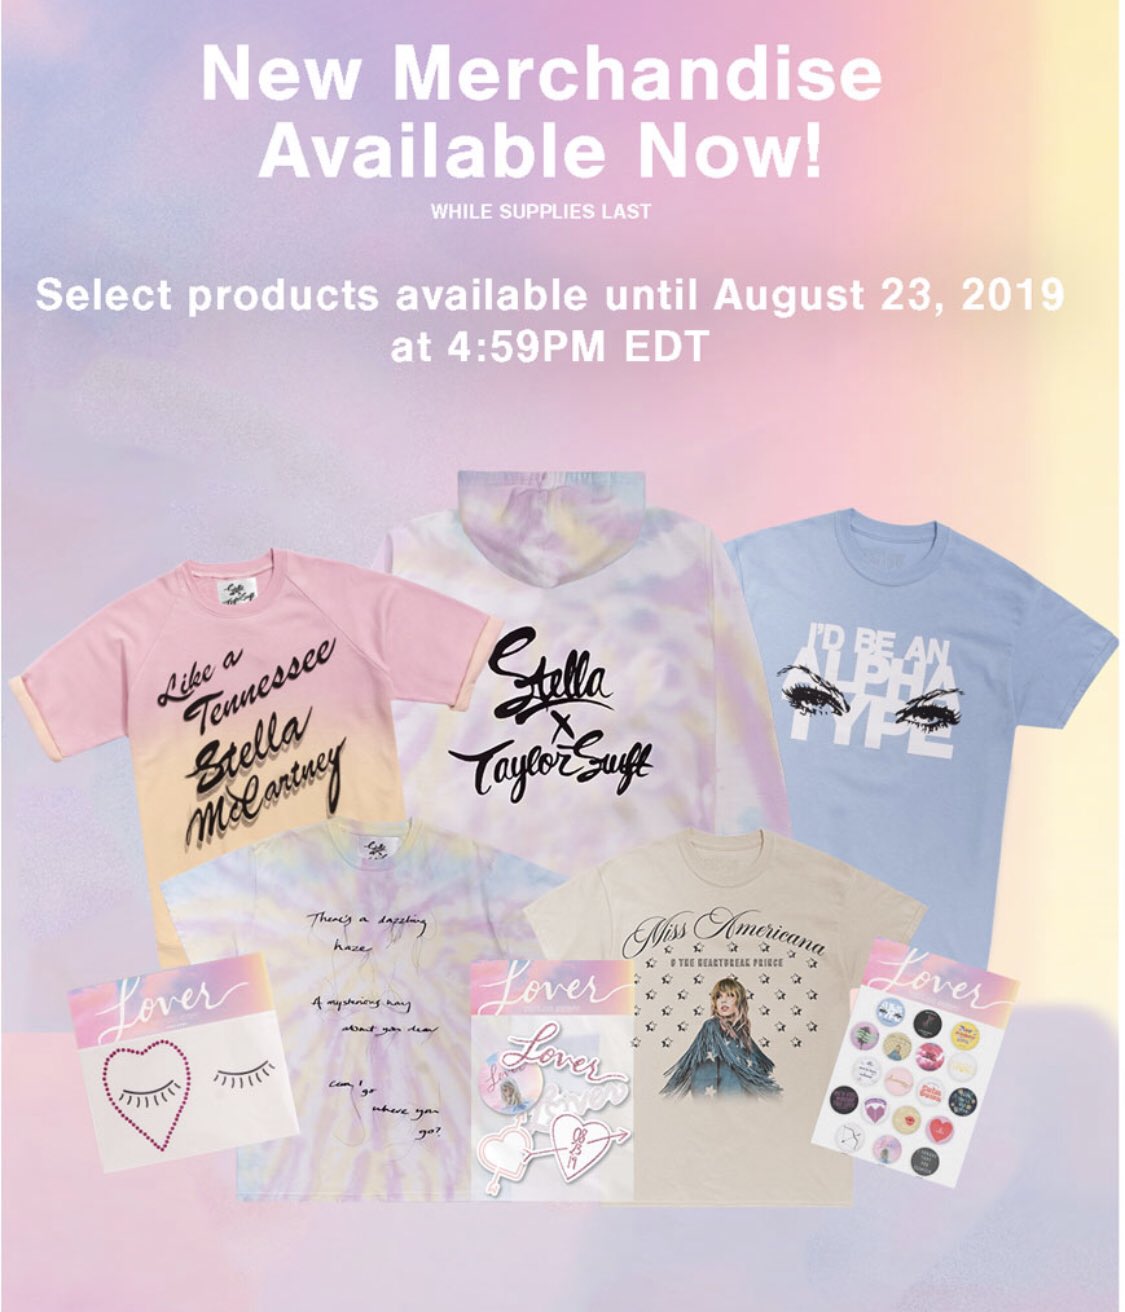 Taylor Swift Official Online Store – Taylor Swift Official Store